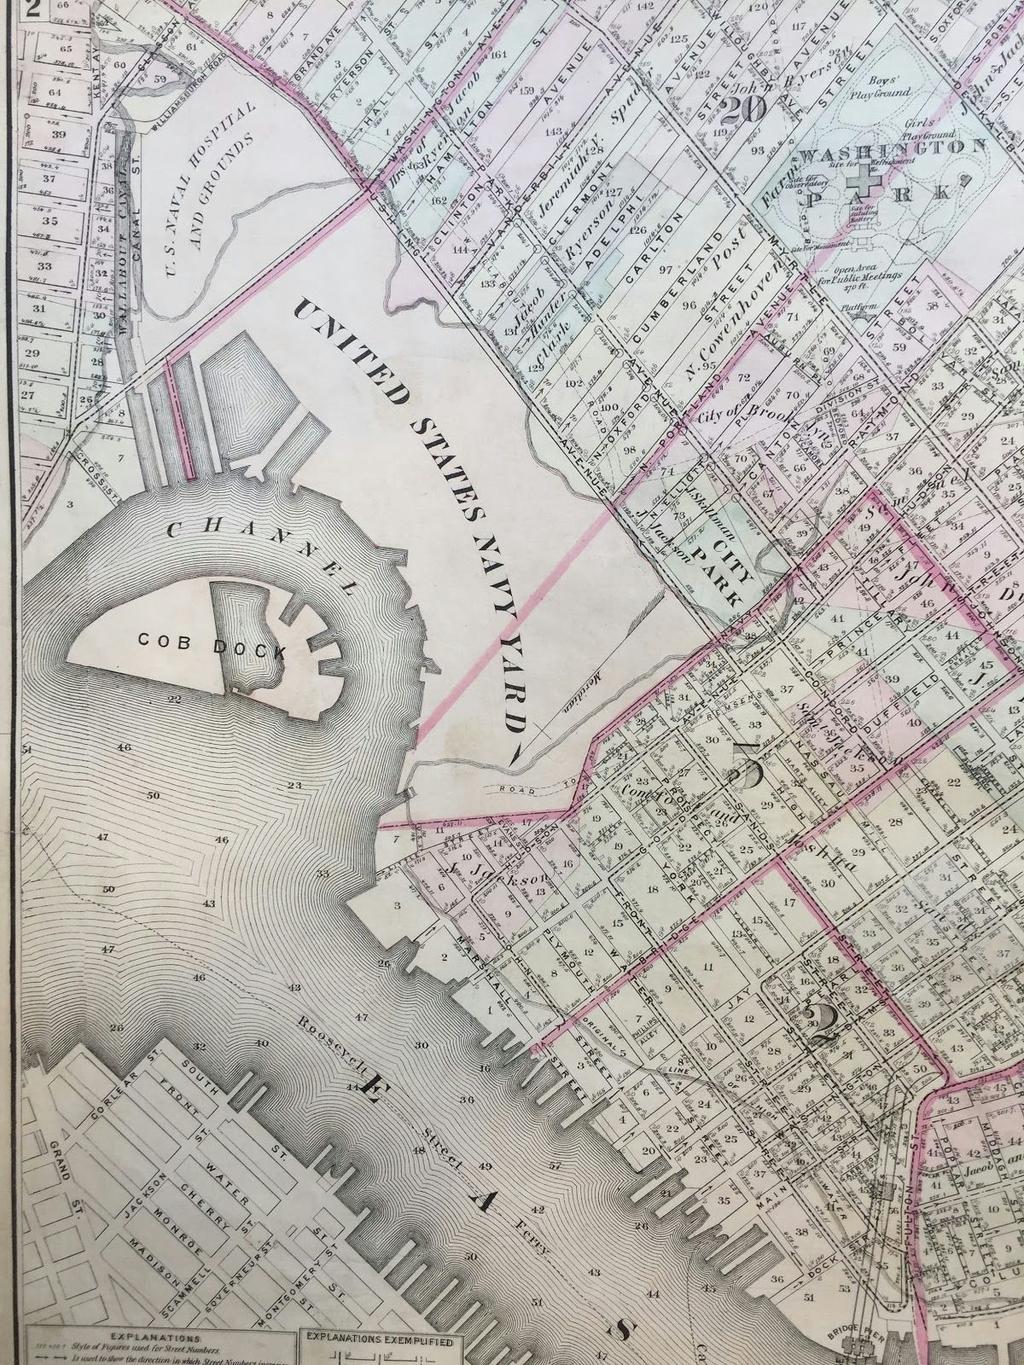 In this 1874 map by Henry Fulton, you can see the original waterfront line. The outward boundary line is now filled in and occupied by The united states navy.